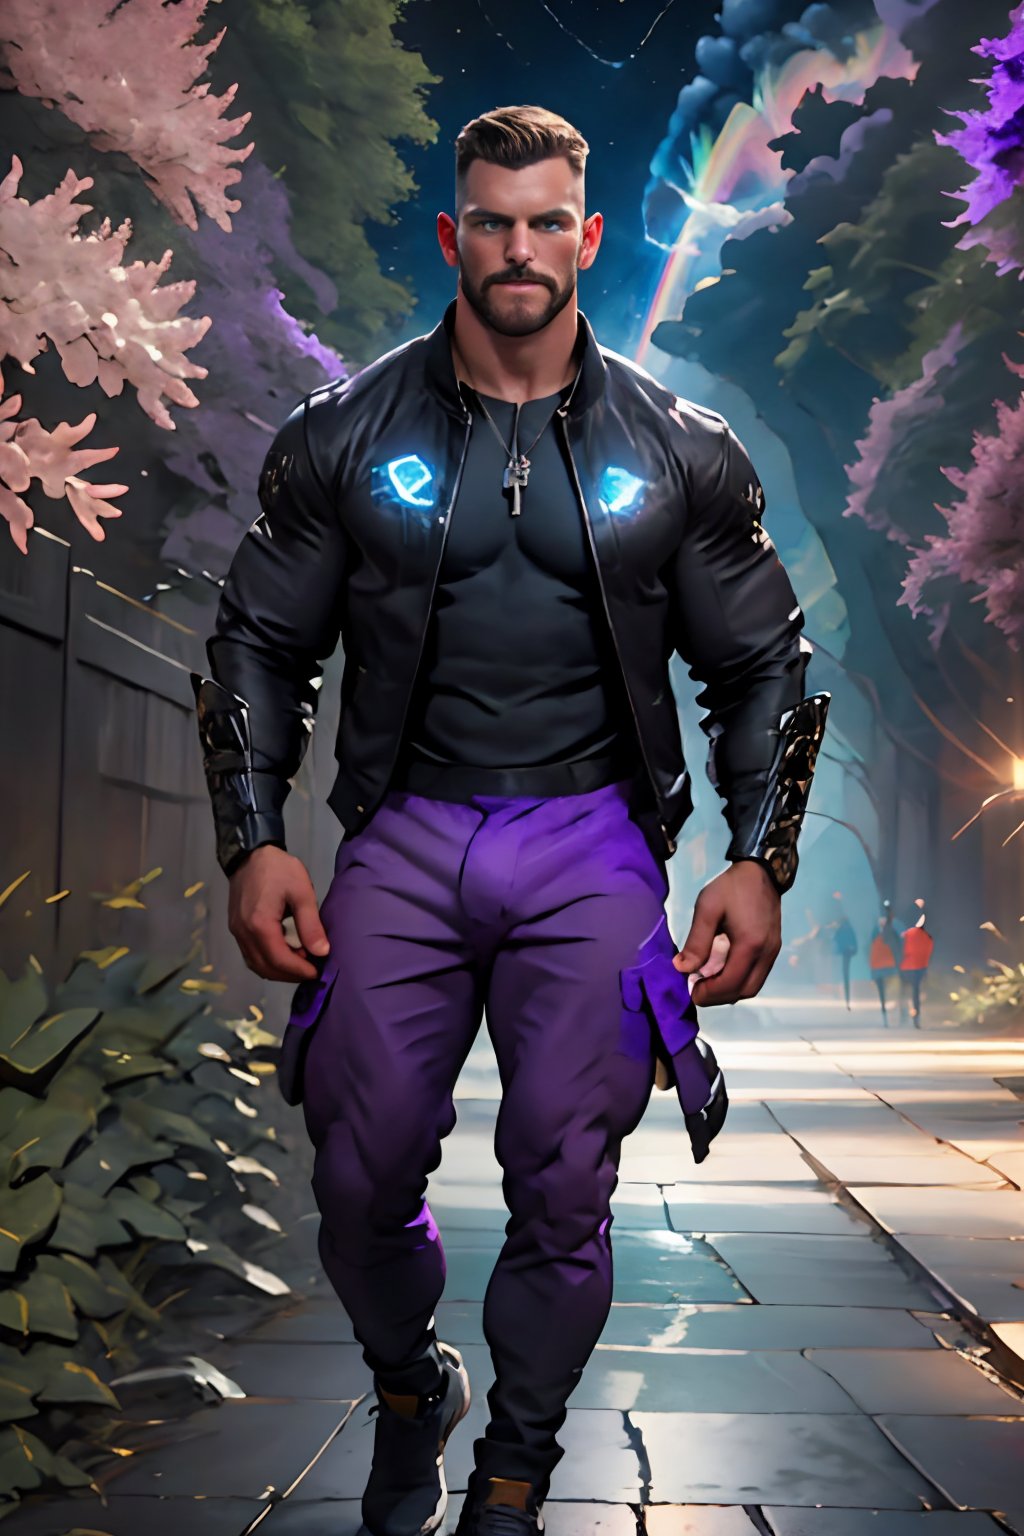 Falko Man stands tall, his intense gaze piercing through the mystique. He wears a dark-purple reflective masculine illusionist jacket that accentuates his broad shoulders and prominent cheekbones. His pale complexion is set off by his striking blue eyes, which seem to bore into the viewer's soul. The arcane symbol on his neck adds an air of mystery.

Before him, the fantasy forest blurs with colorful caleidoscopic colors, creating a circular motion that defies gravity. A shy rainbow bends and merges with the clouds, as night and day blur together in a vibrant, convoluted chiaroscuro. The atmosphere is thick with magic and an otherworldly energy.

In this fantastical realism, Falko Man exudes confidence and power, his masculinity radiating like a beacon. His dark hair is messy and short, framing his chiseled features. As he gazes intensely, the camera captures every detail, from the subtle play of light on his facial hair to the way his eyes seem to see right through the viewer.

Shot: Close-up, 200mm lens, Leica style.